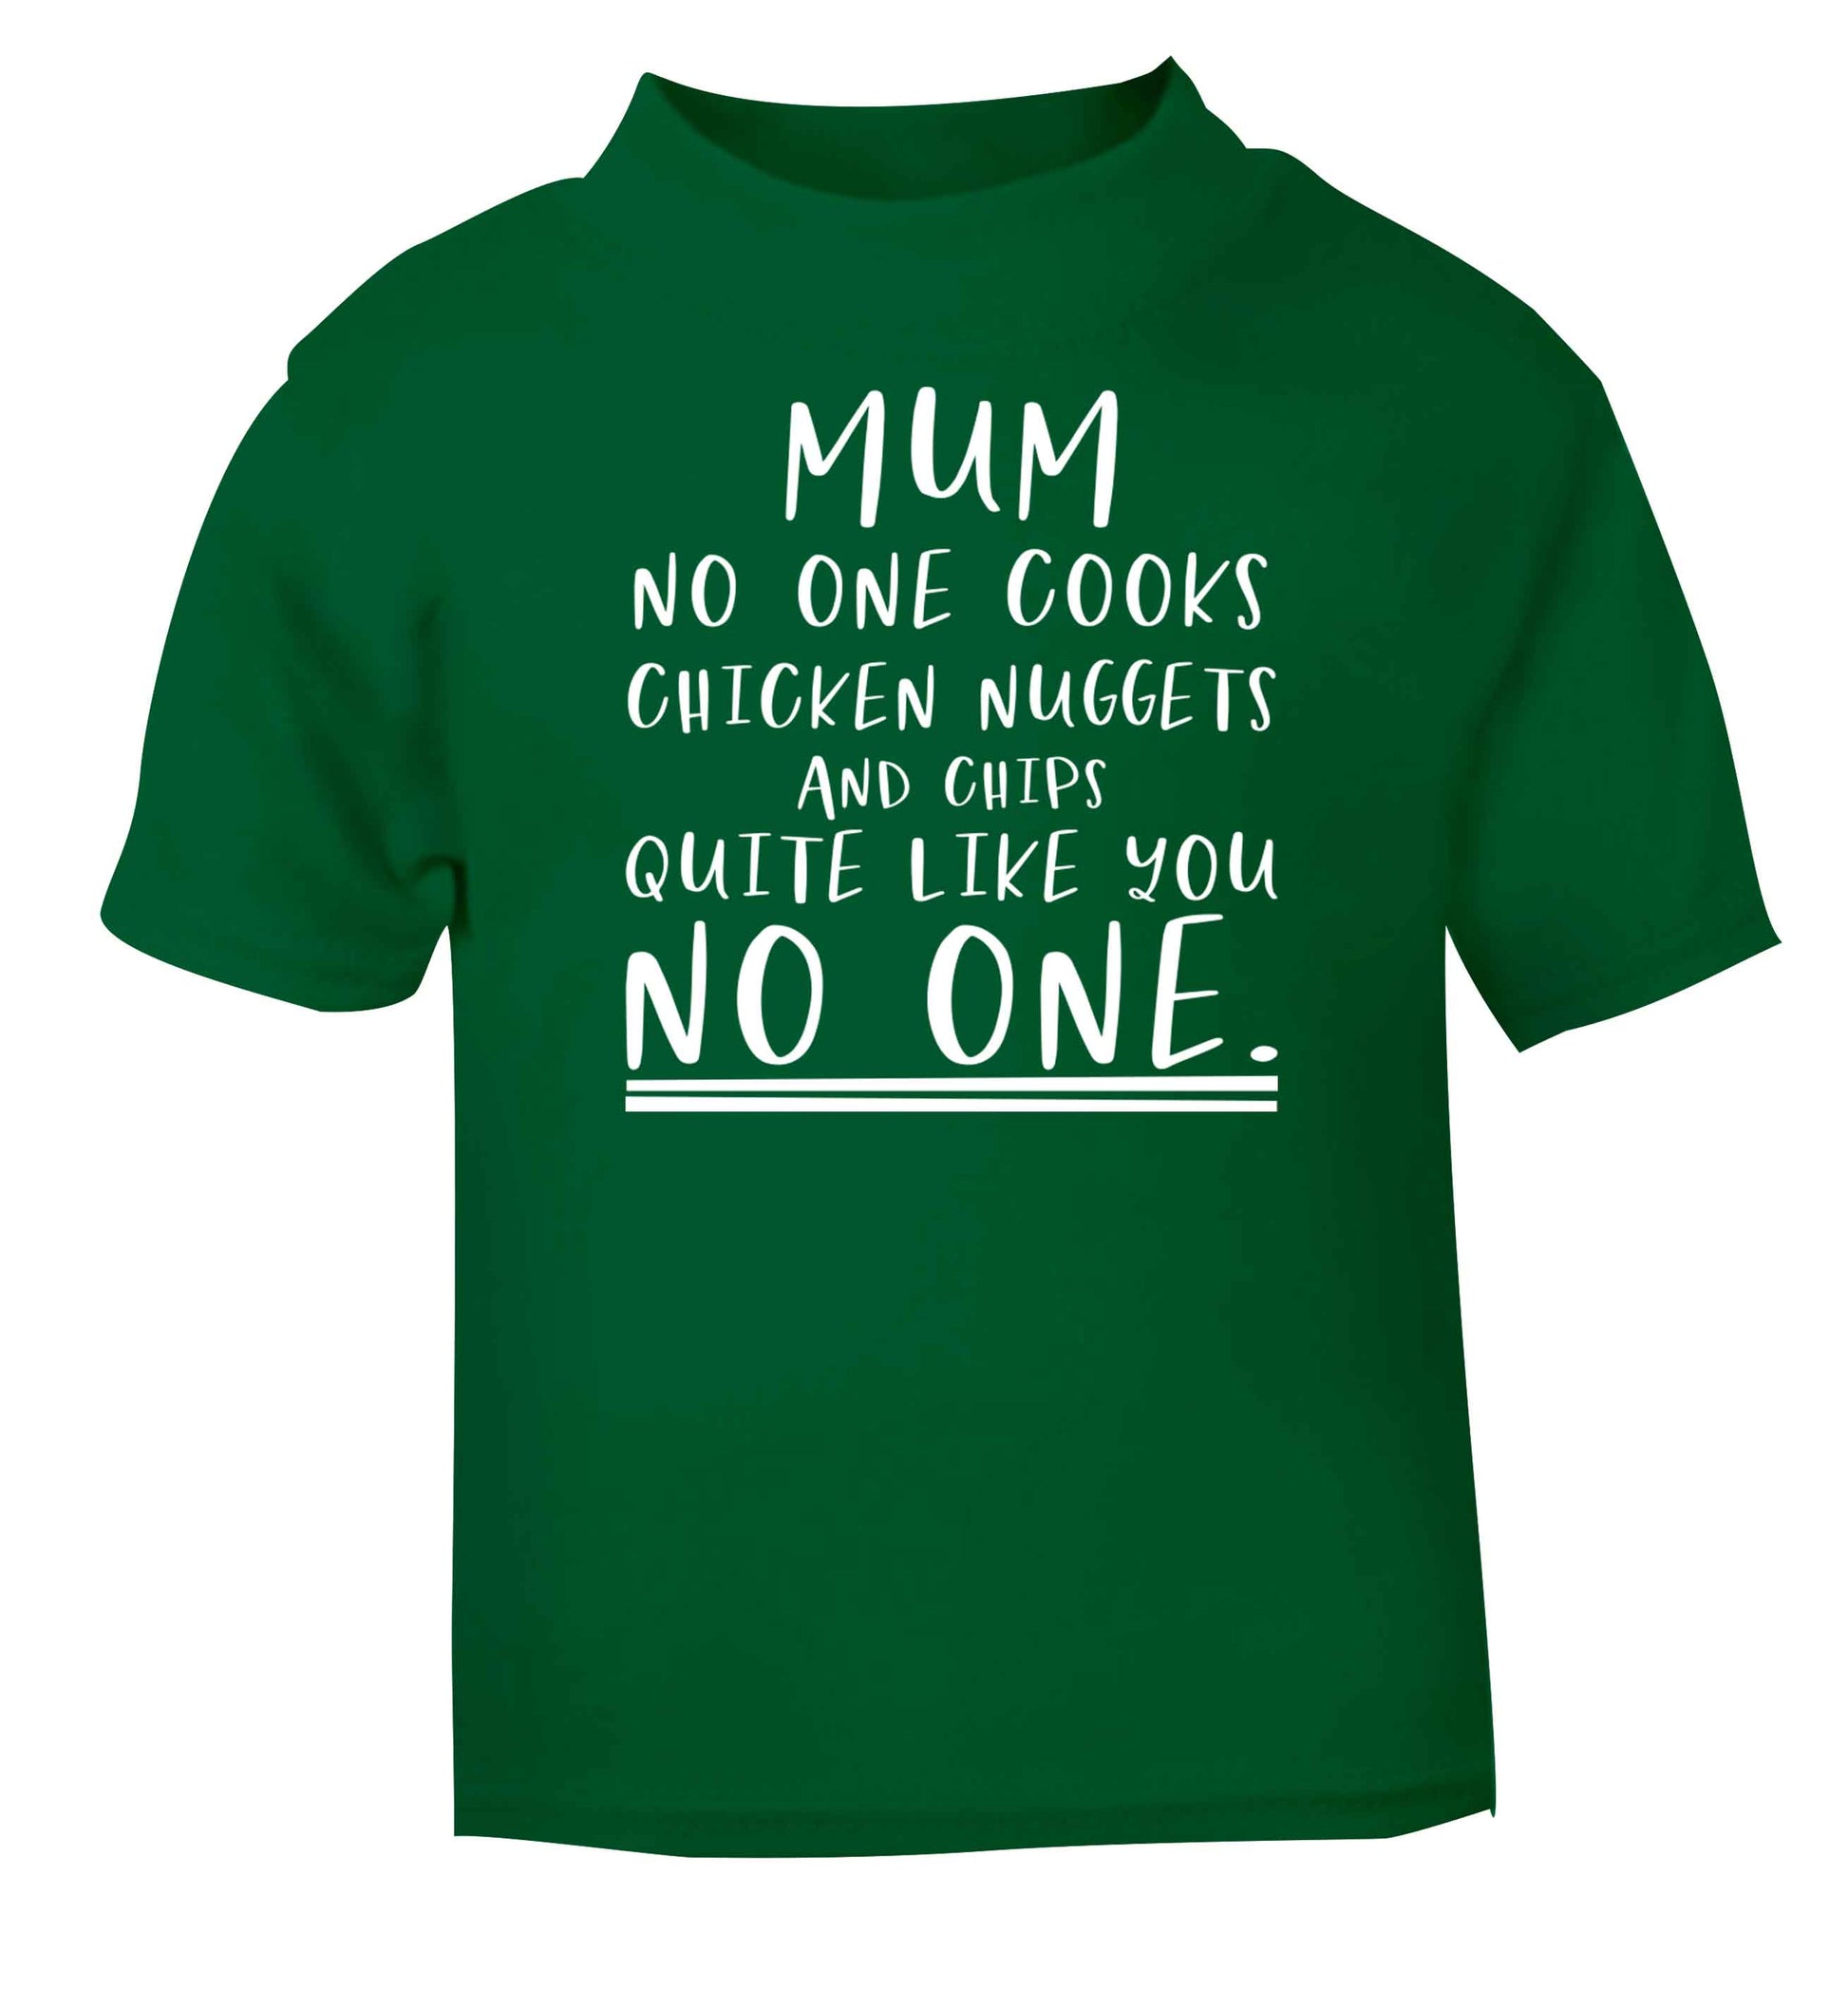 Super funny sassy gift for mother's day or birthday!  Mum no one cooks chicken nuggets and chips like you no one green baby toddler Tshirt 2 Years